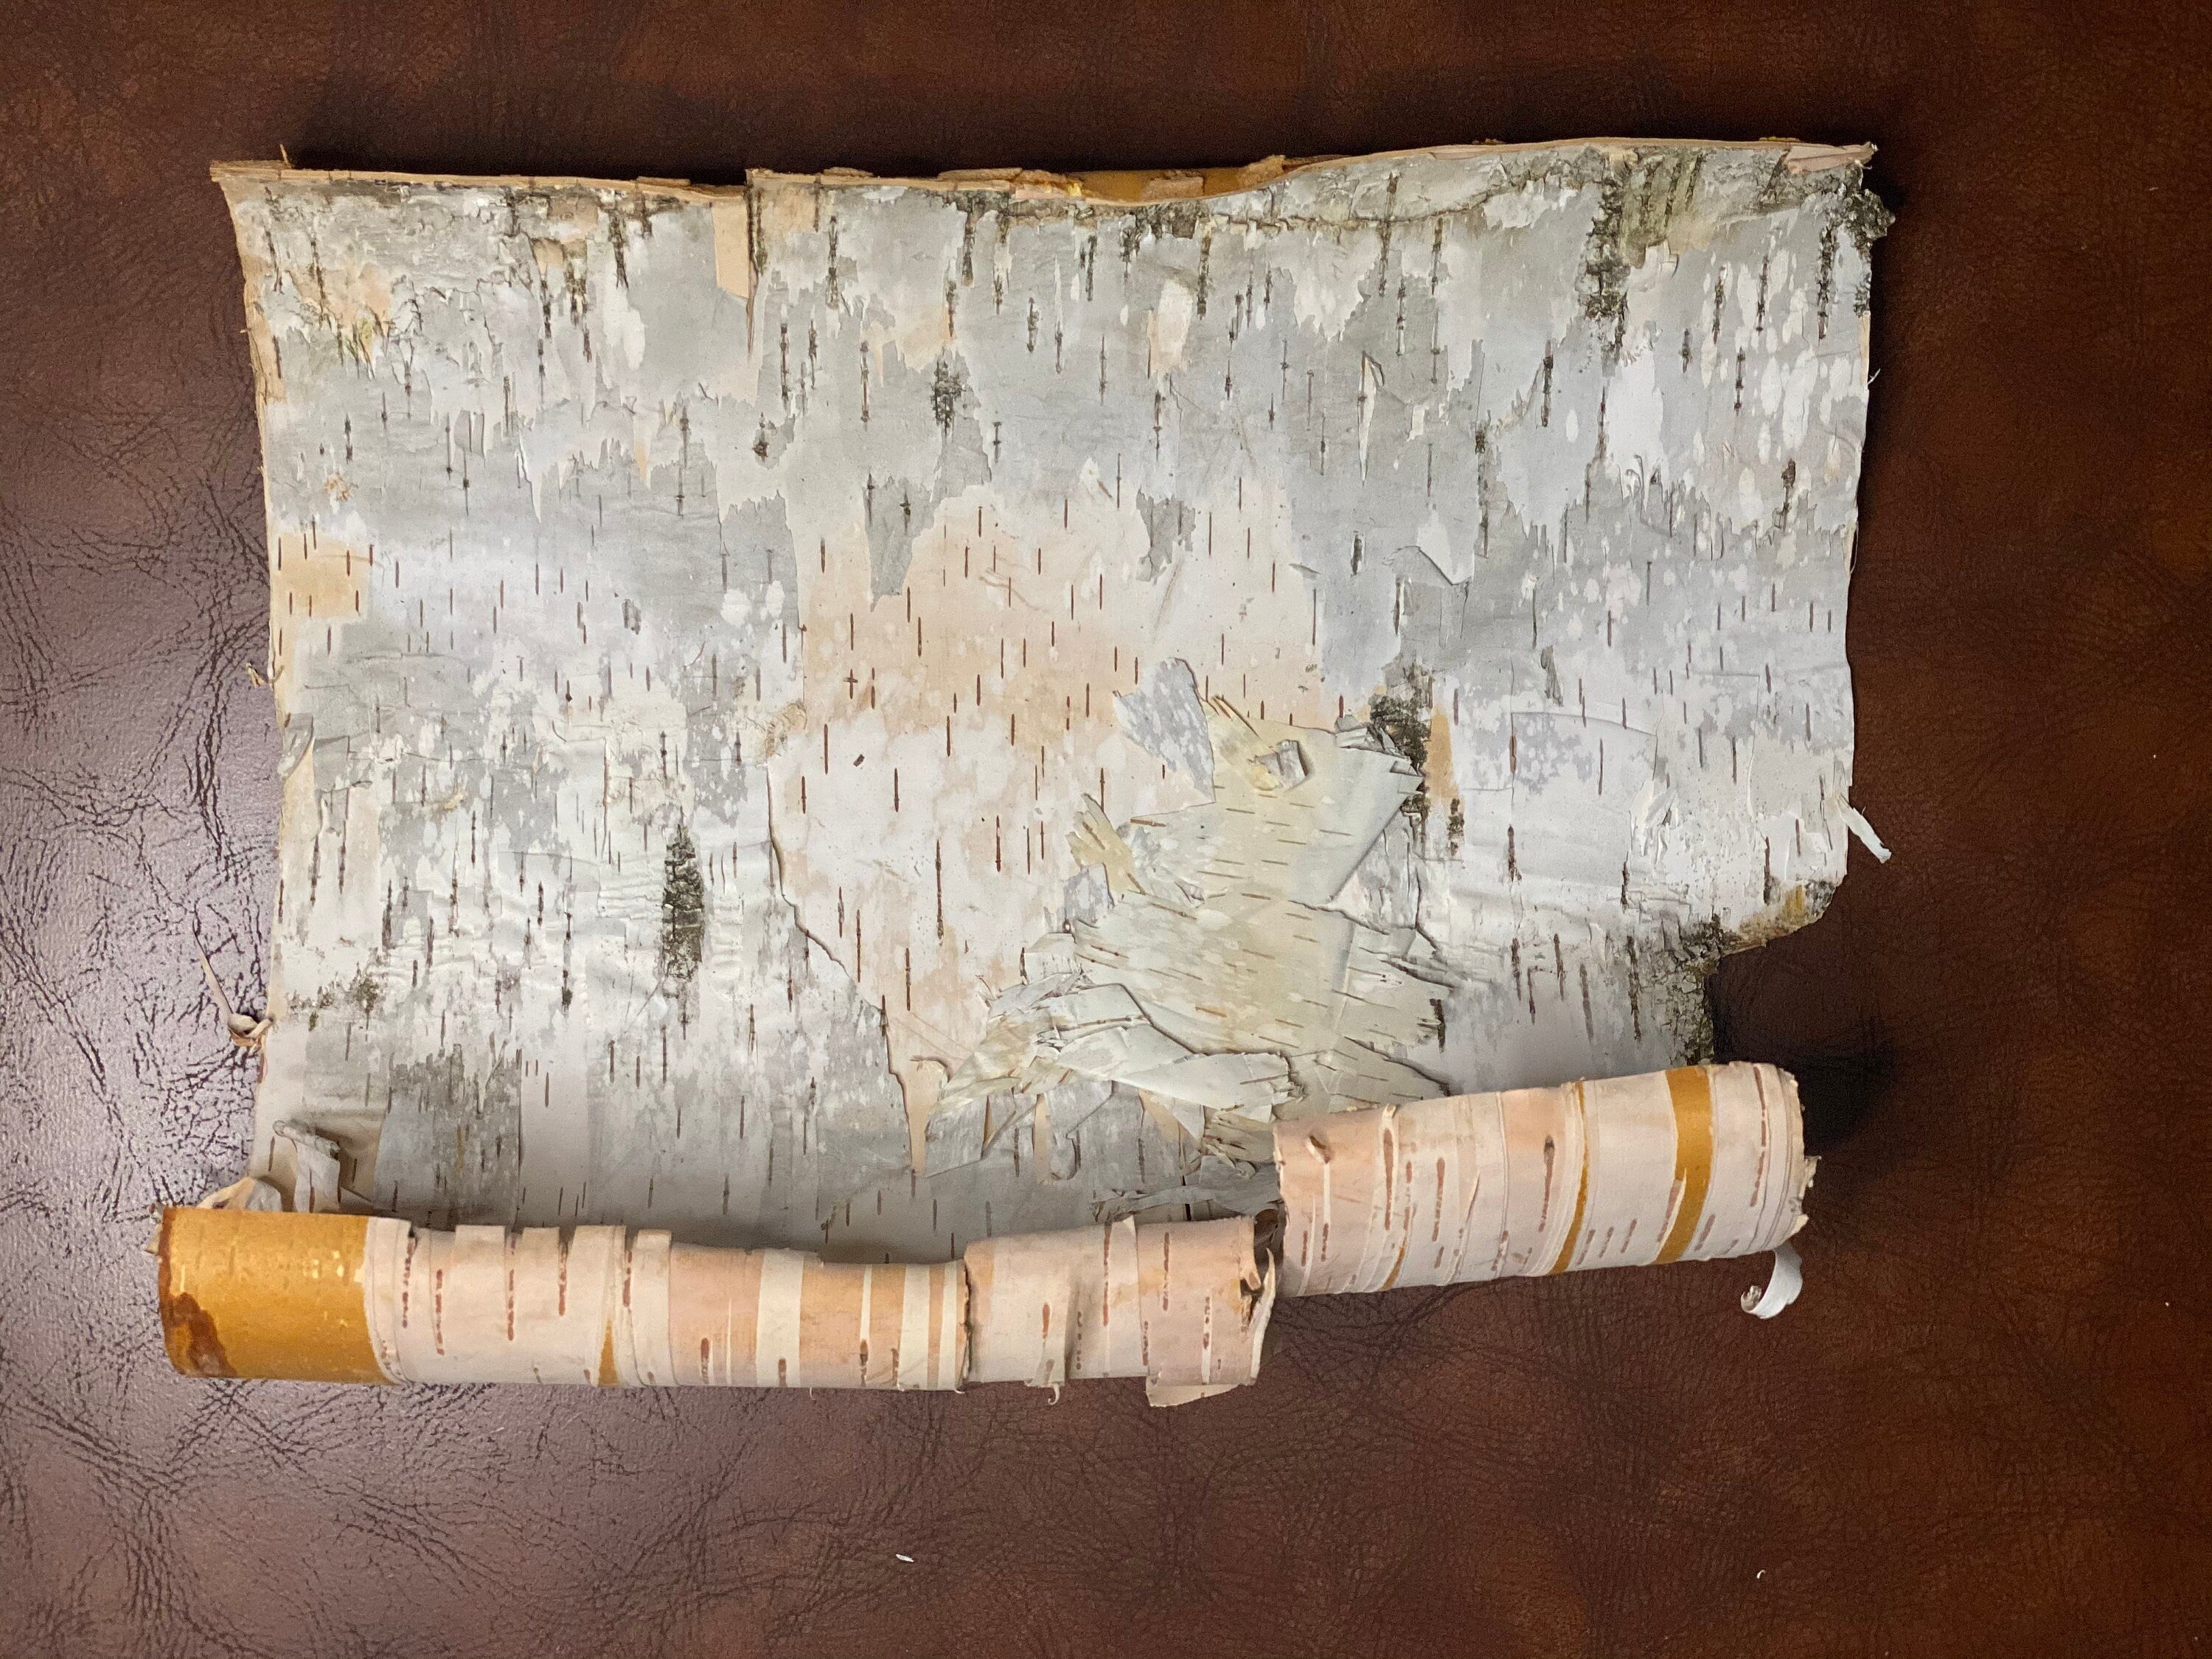 White Birch Bark, 17 Inches by 16 Inches